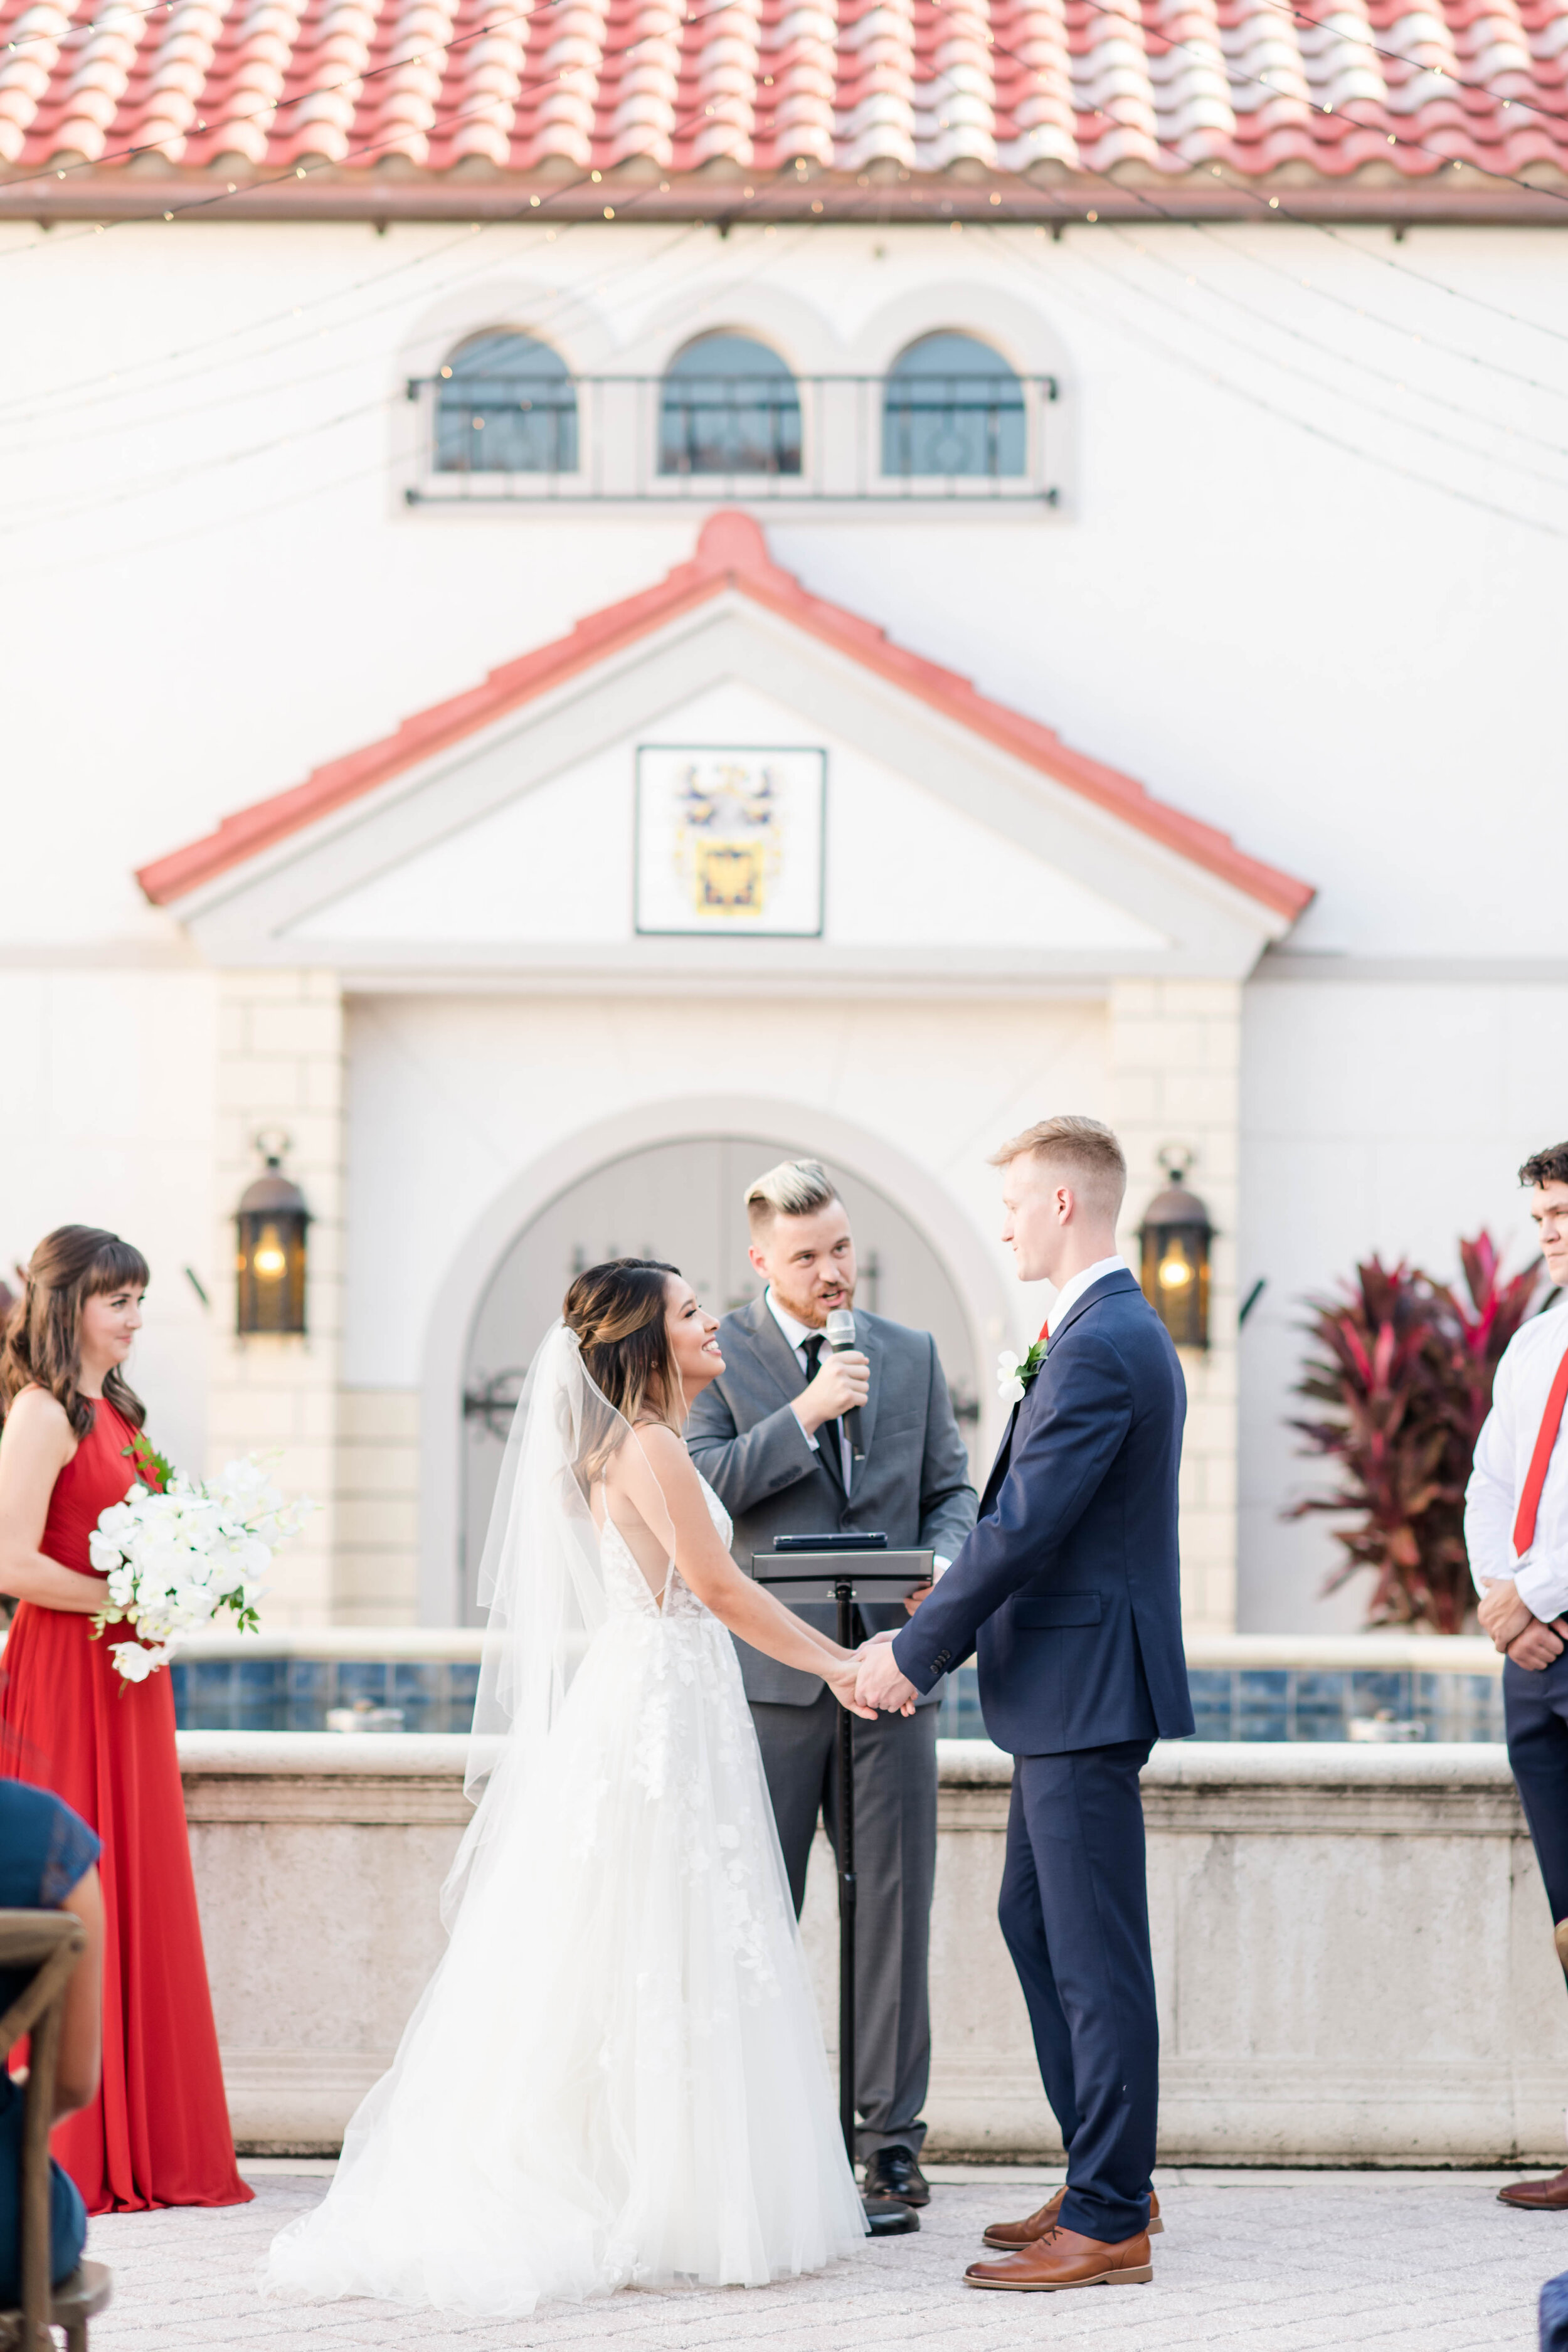 An elegant and European inspired wedding ceremony in central Florida planned by Elegant Affairs by Design a wedding planner for the bride who dreams of a fairytail wedding.jpg